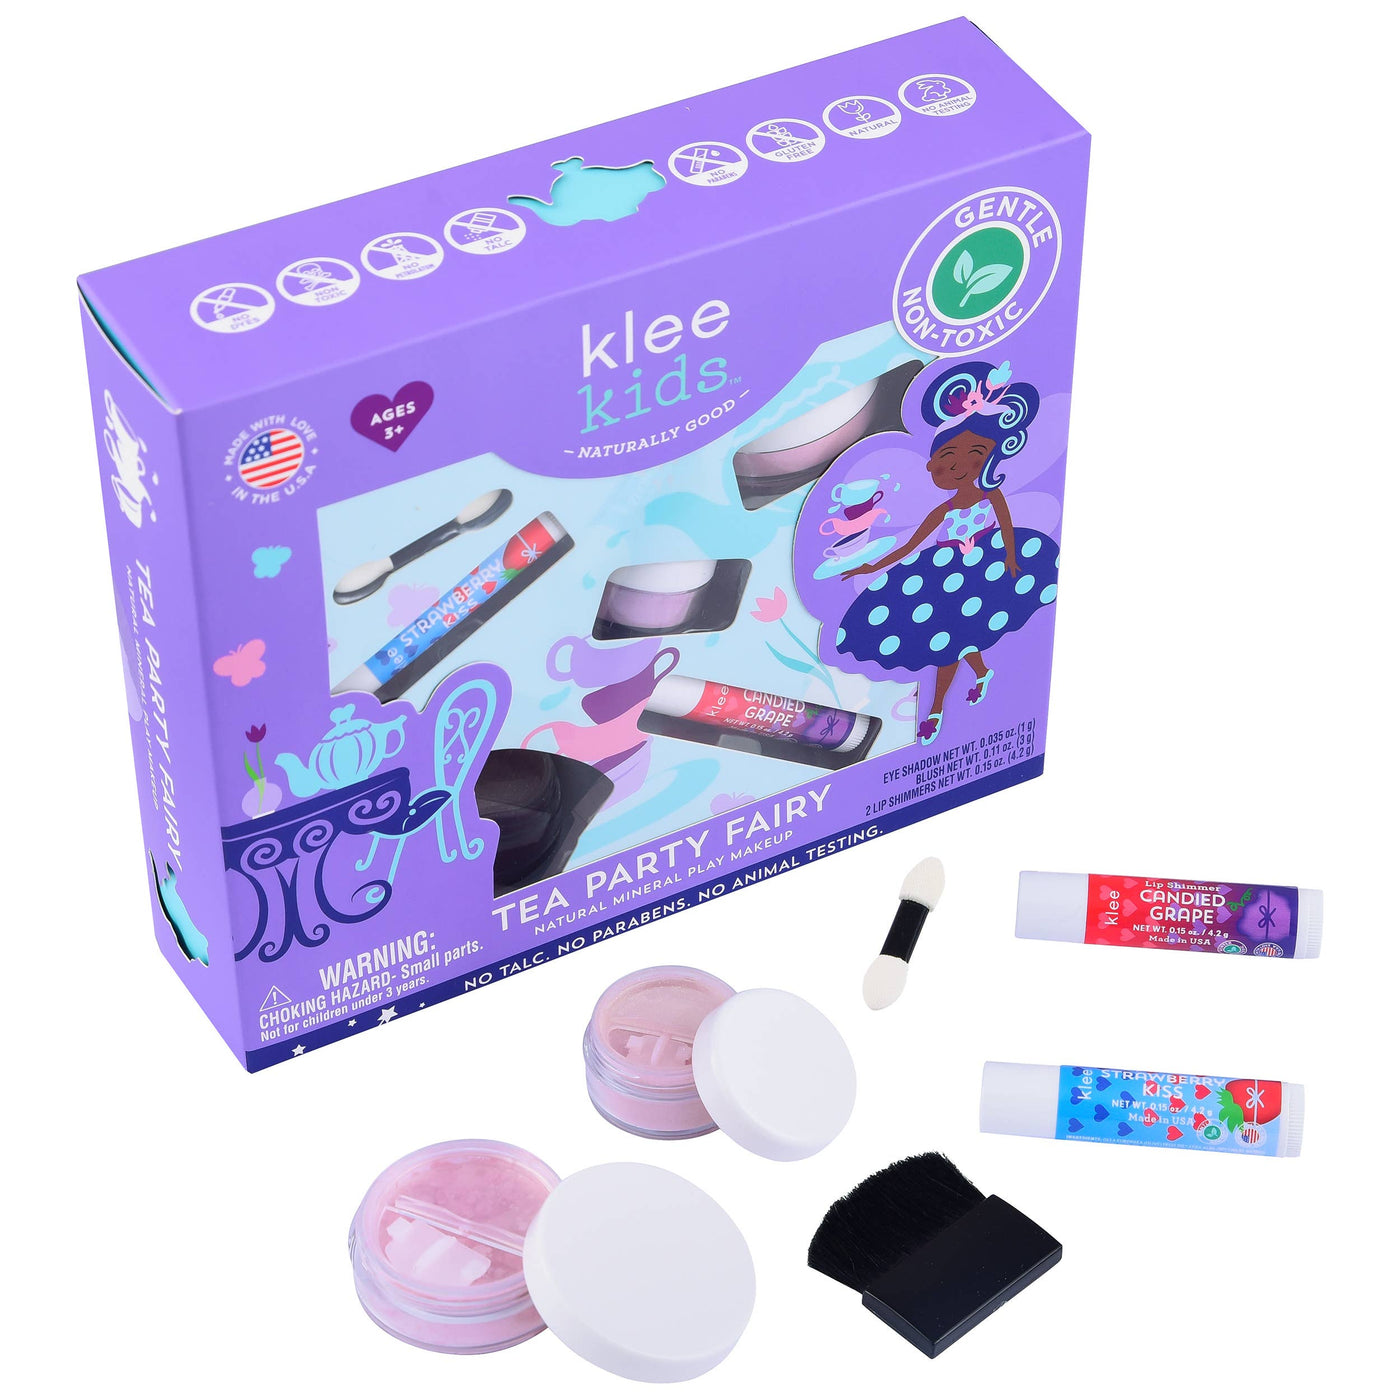 Tea Party Fairy - Klee Kids Natural Mineral Play Makeup Kit